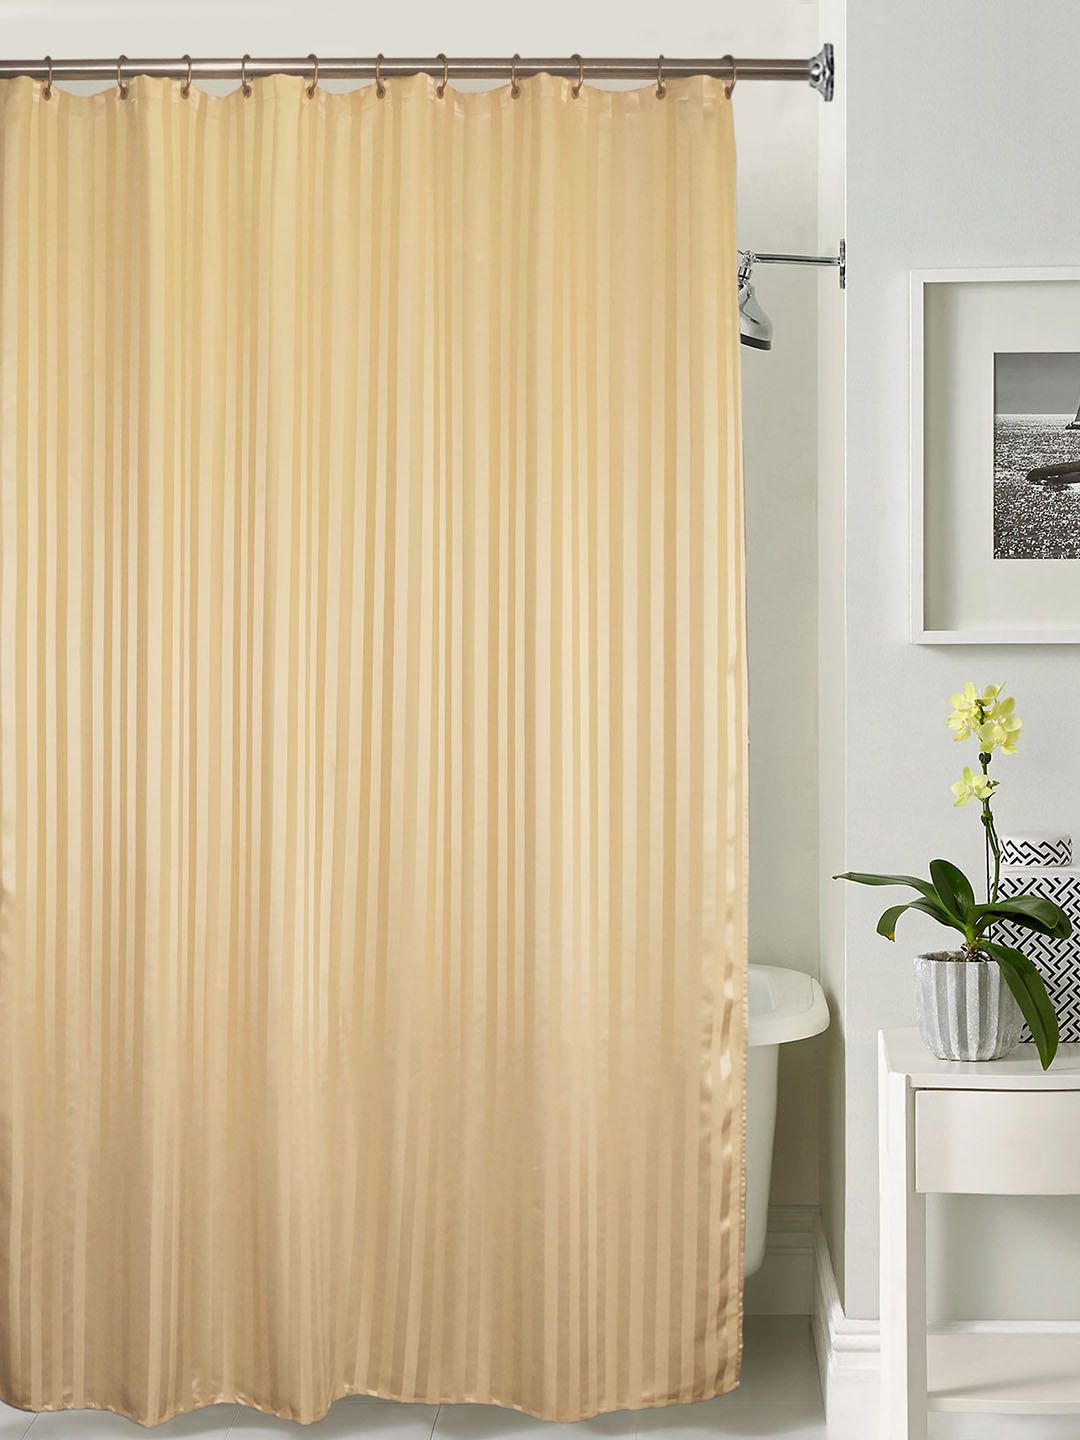 Lushomes Beige Striped Shower Curtain Price in India